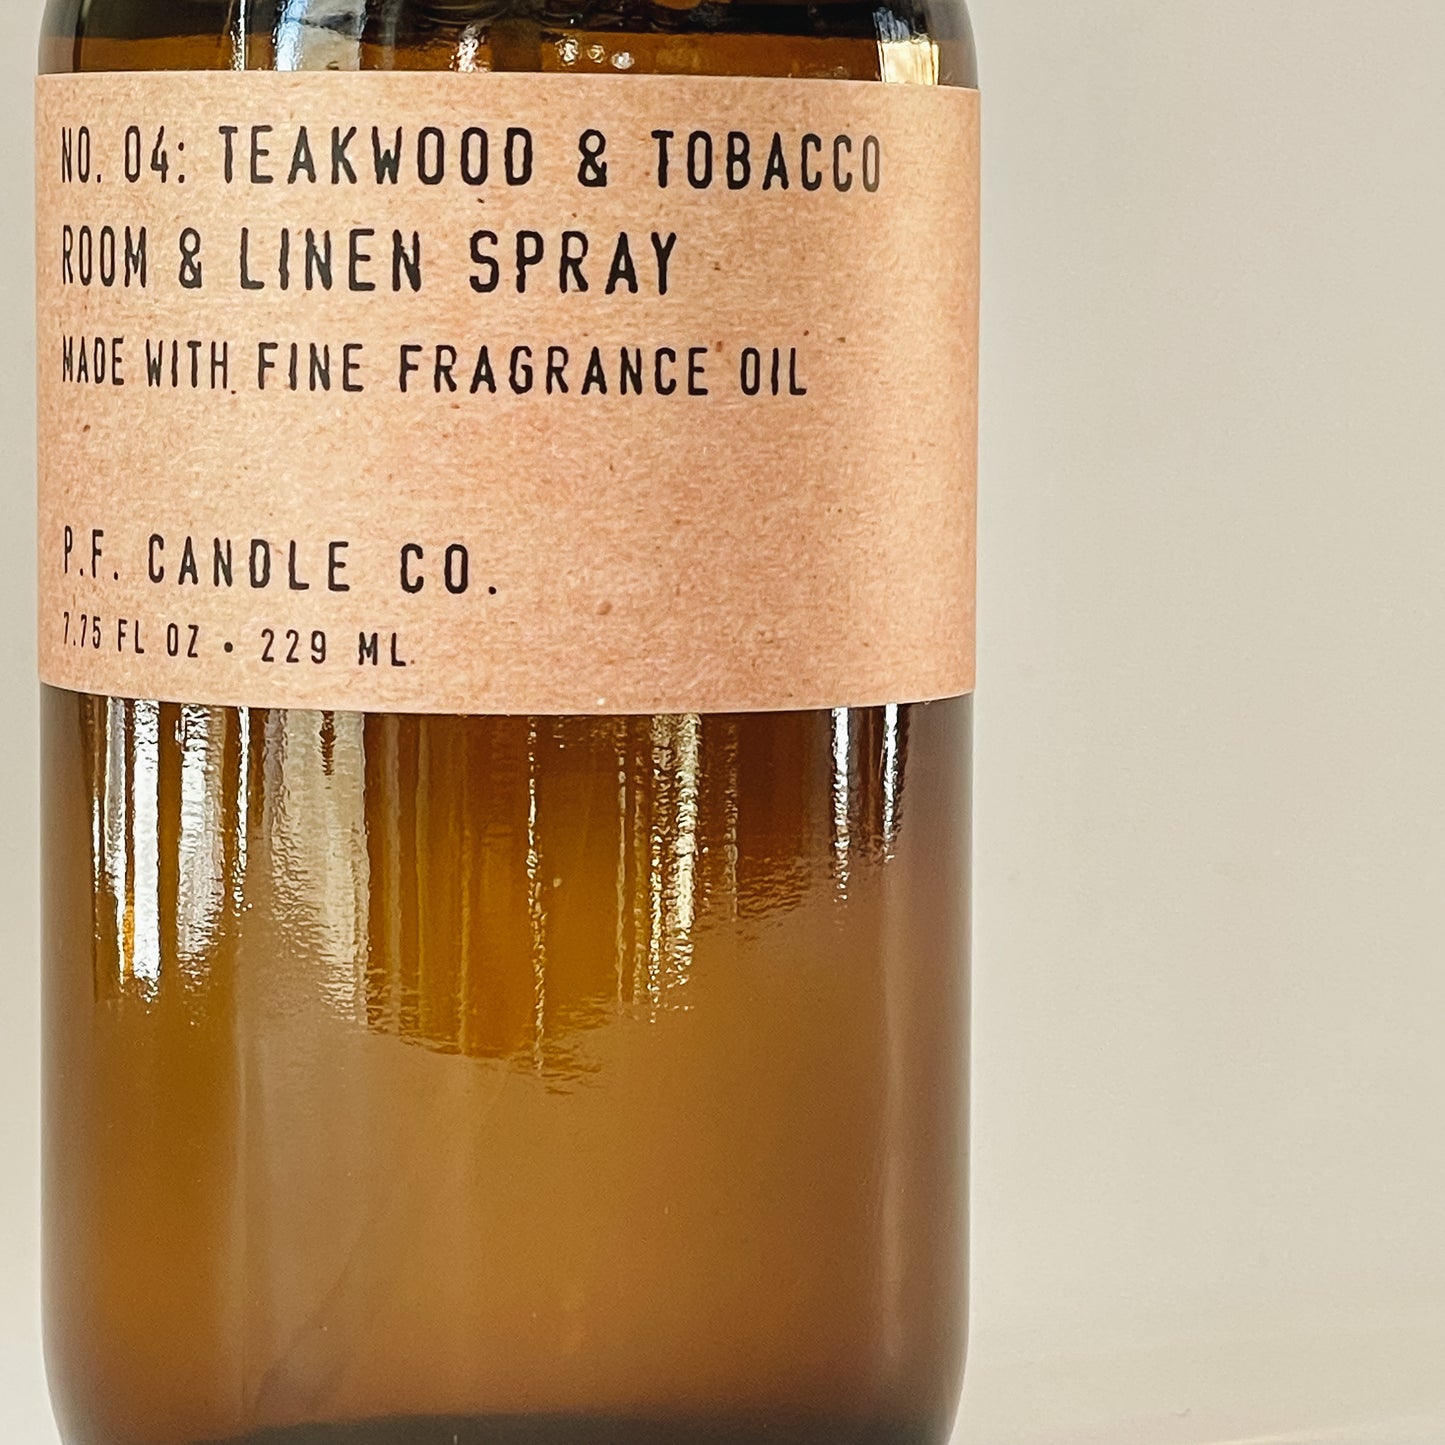 P.F. Candle Co. Room & Linen Spray | Teakwood & Tobacco